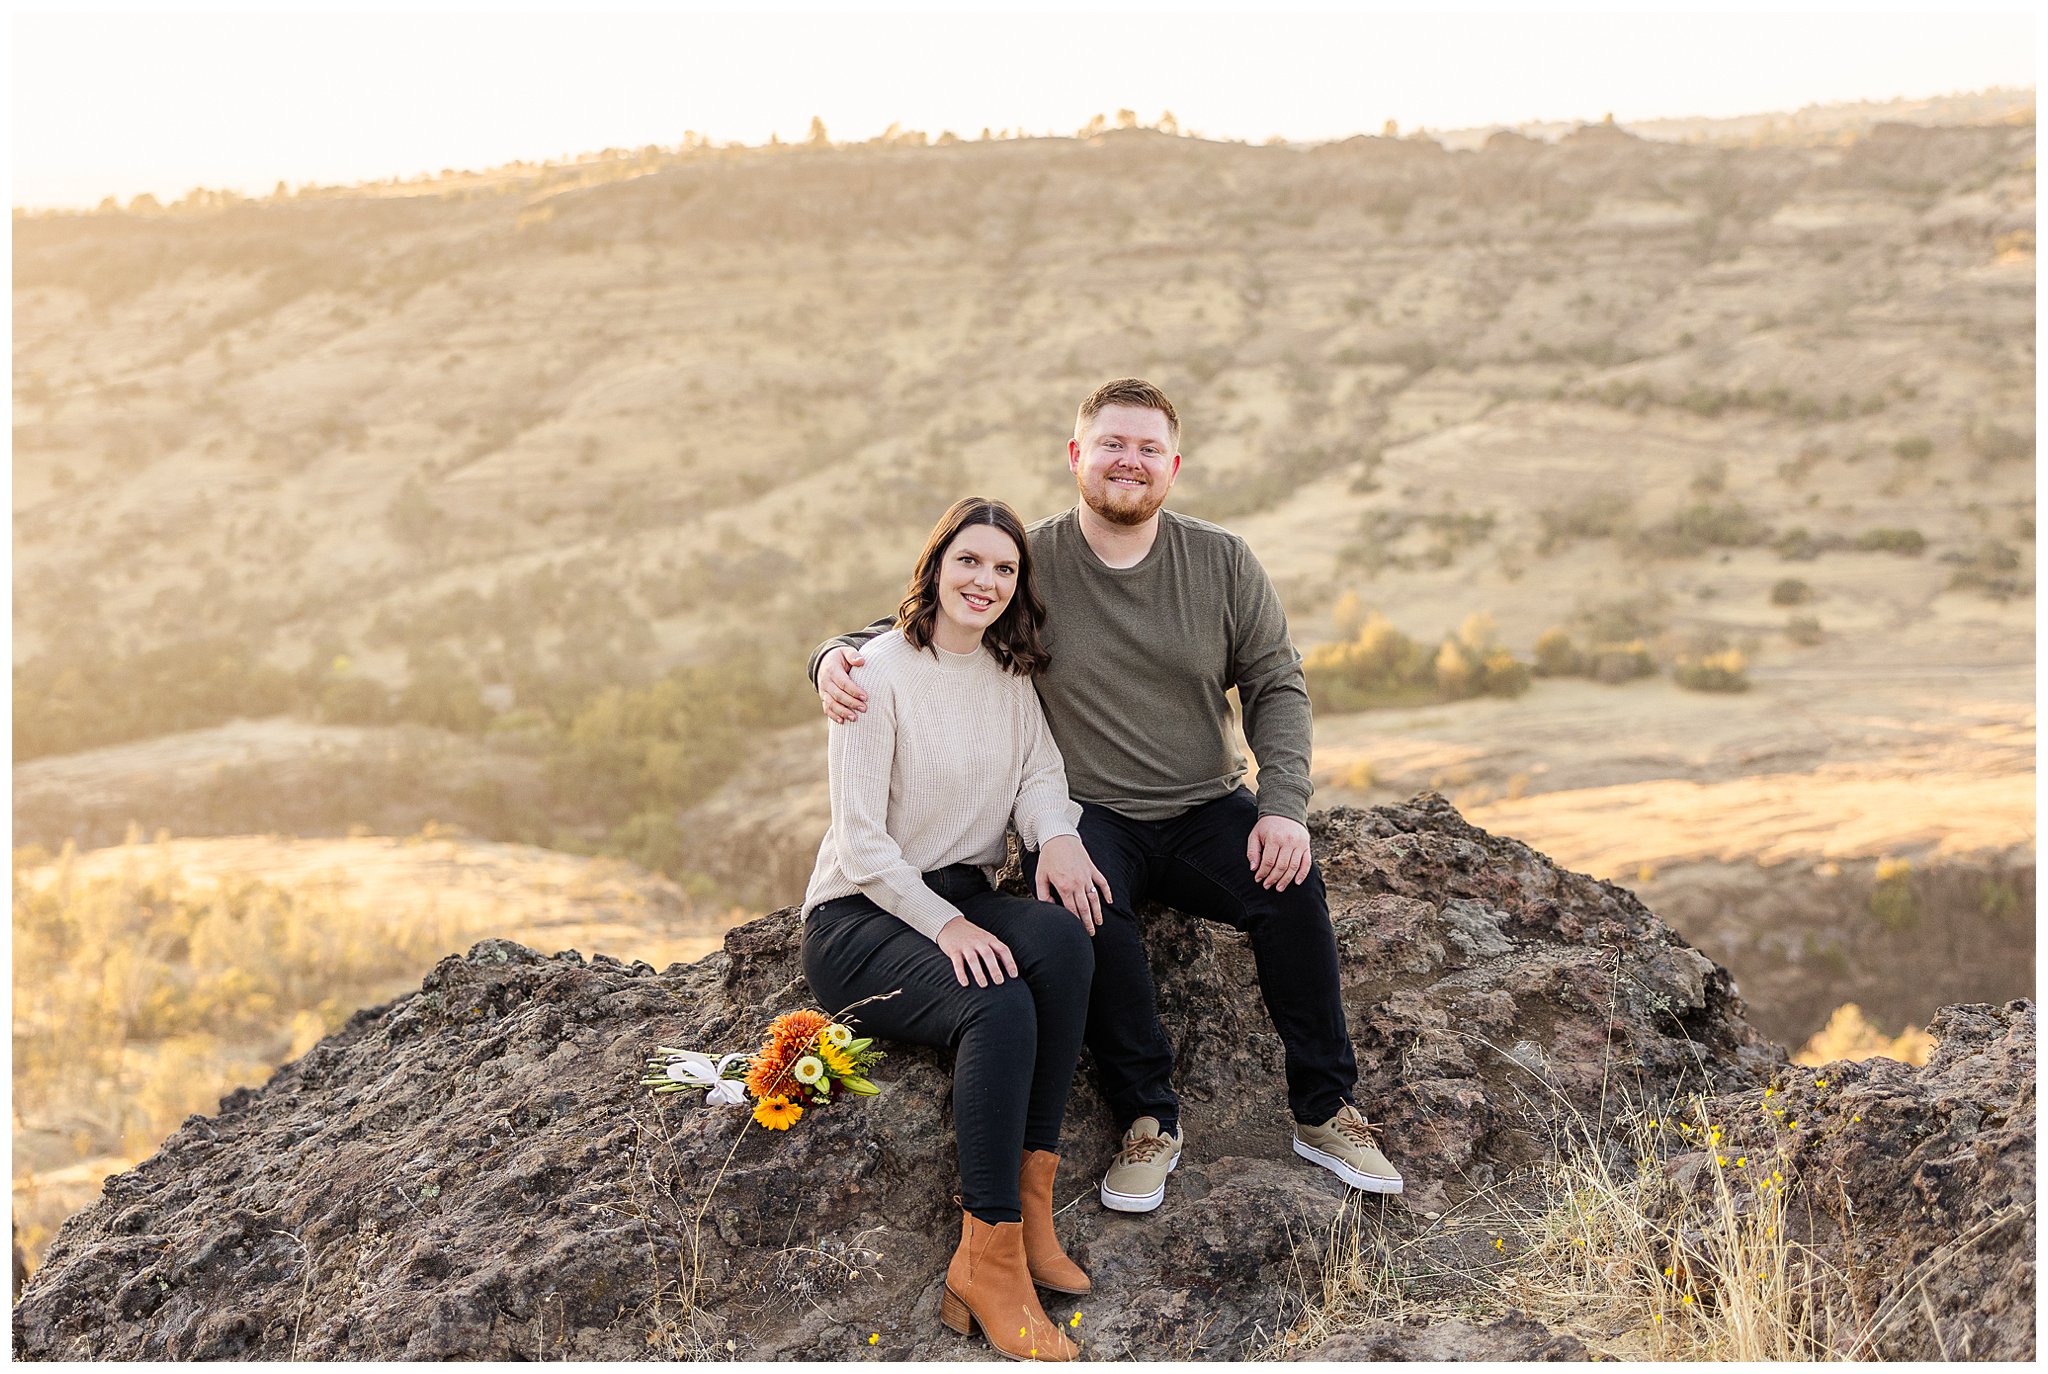 Peregrine Point Disc Golf Course Engagement Session Fall October Floral Bouquet Champagne Fall Green Orange Rust,